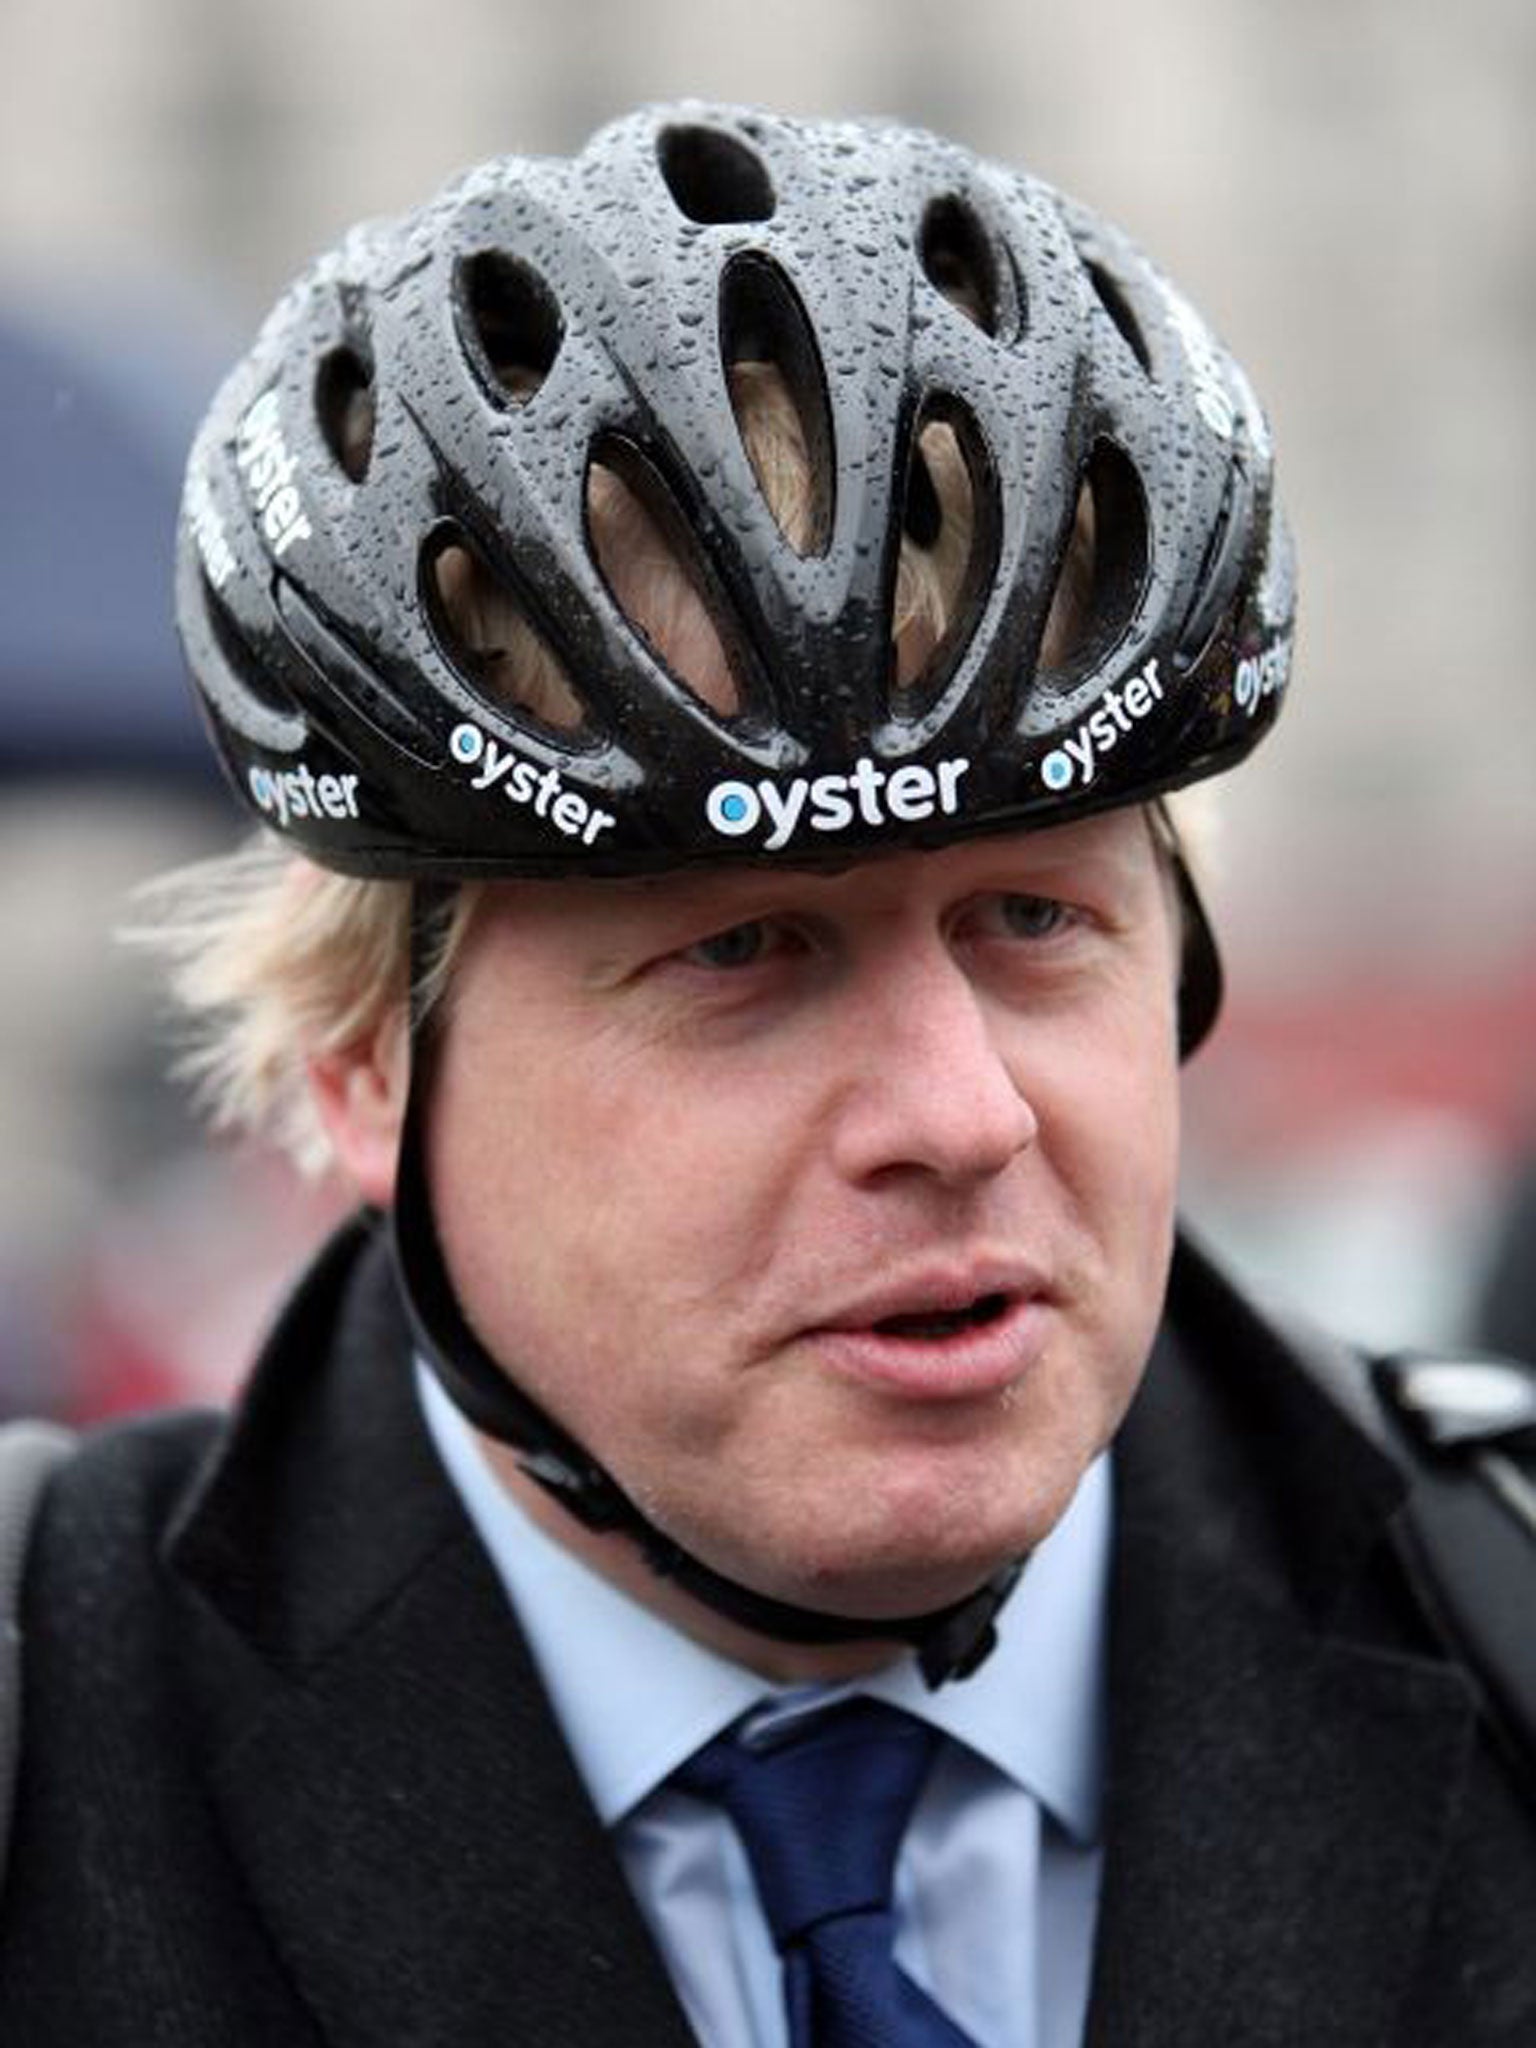 The Mayor of London Boris Johnson has called cyclists wearing headphones an 'absolute scourge' and said he would not be against banning them